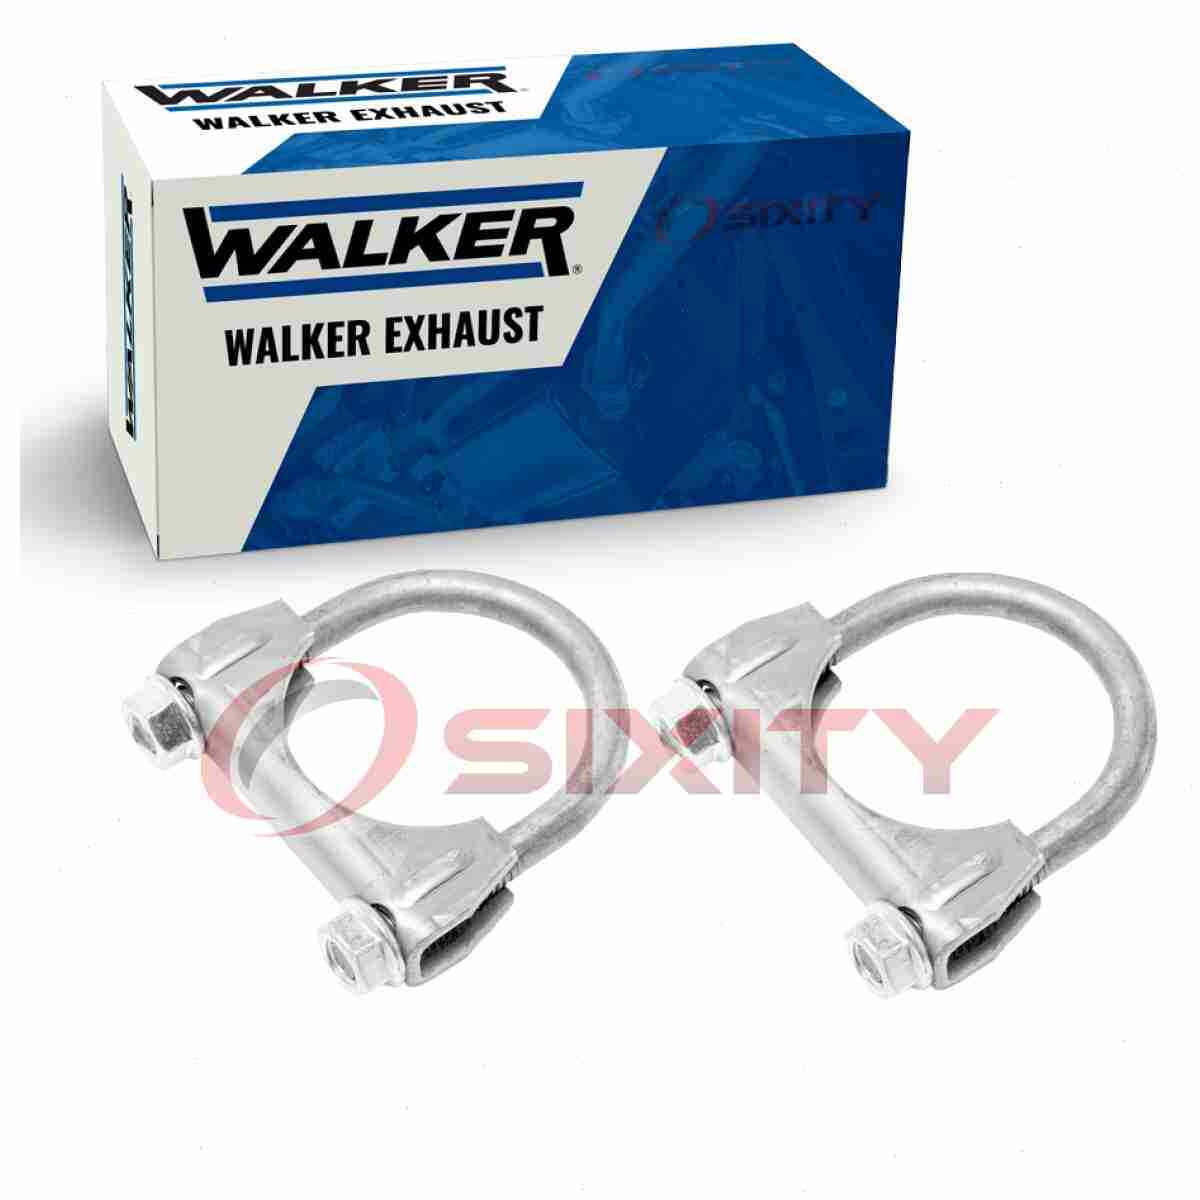 2 pc Walker Exhaust Clamps for 1974-1987 Oldsmobile Cutlass Supreme 5.0L cl